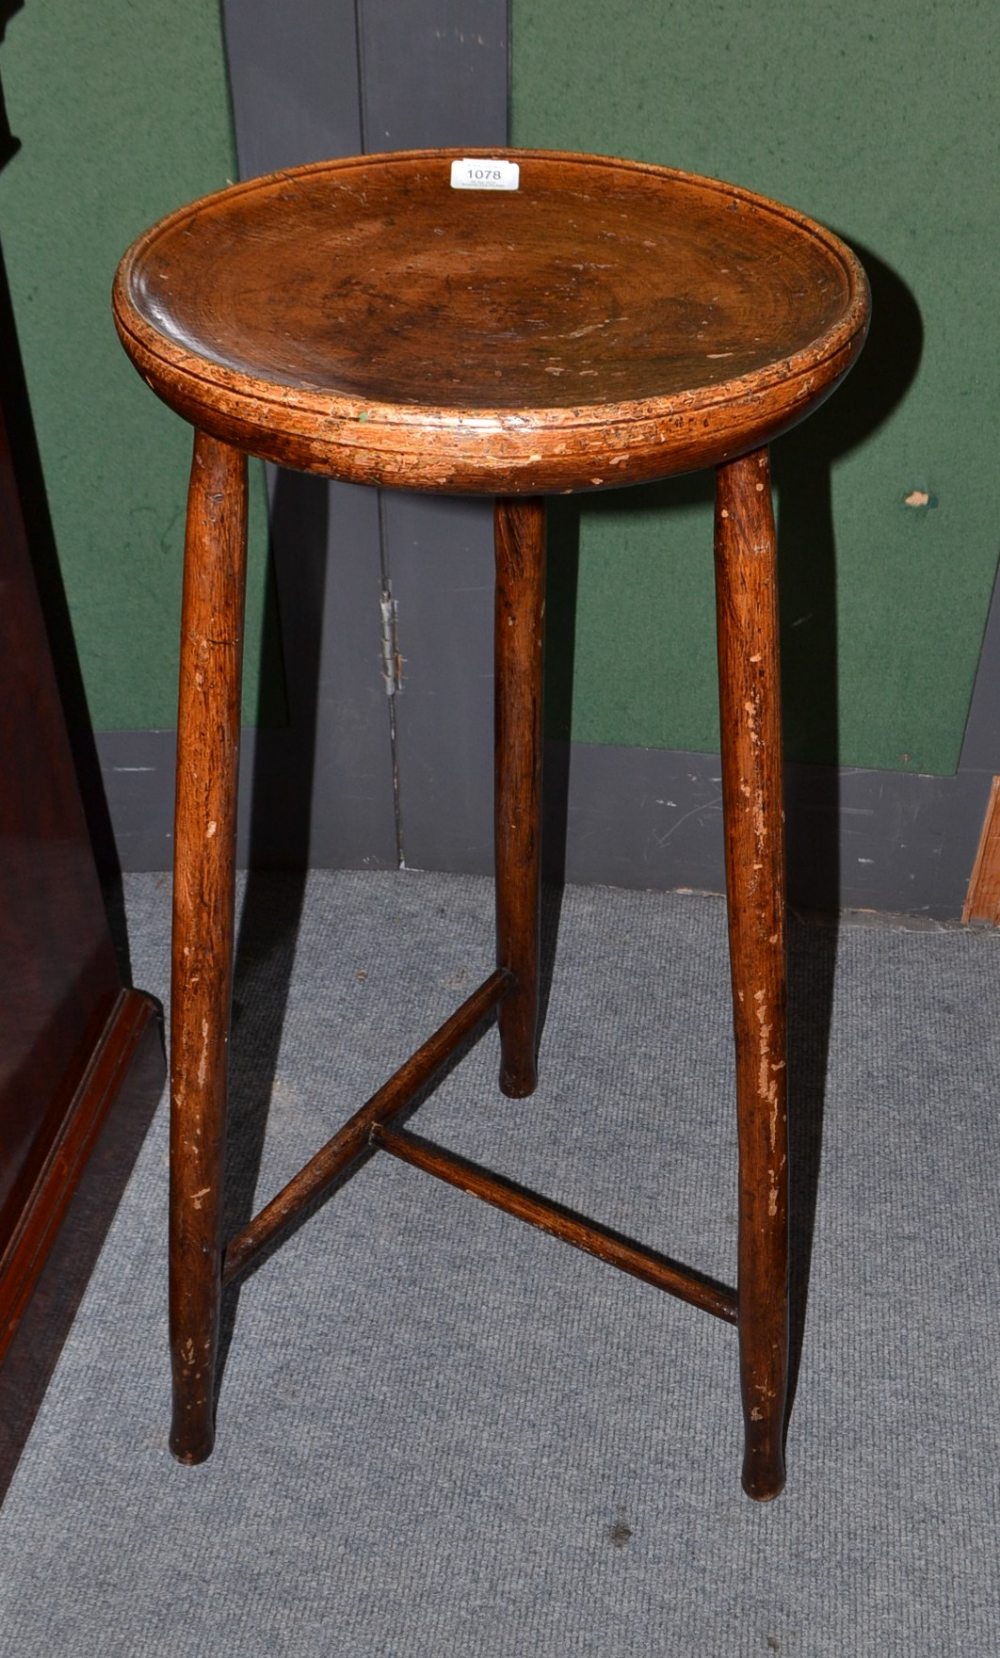 A George III Provincial Turned Oak Stilton Stand, late 18th/early 19th century, the dished top